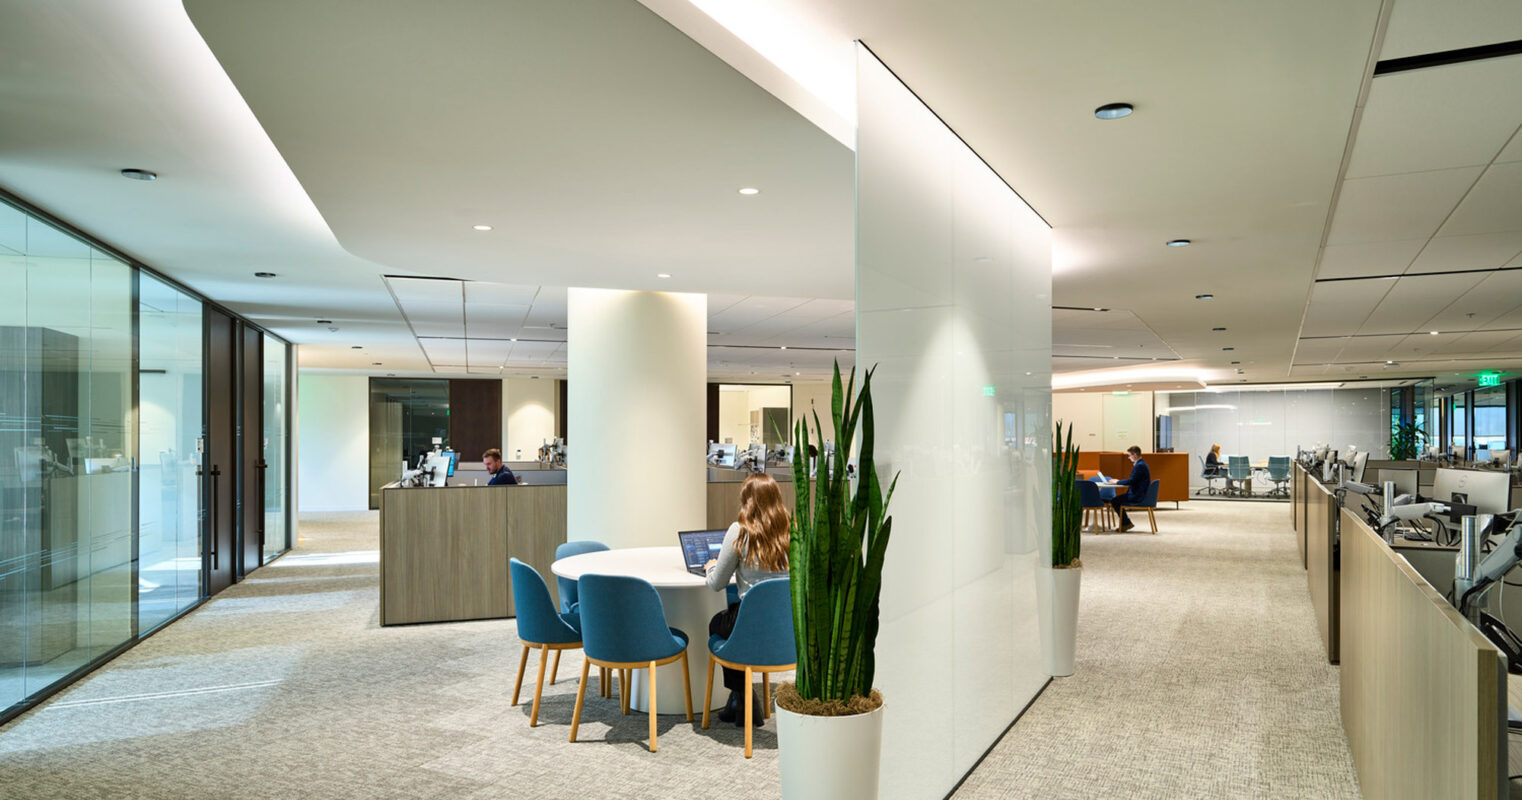 Modern office interior featuring sleek white columns, curvilinear ceiling accents, and textured carpeting. Ambient lighting complements minimalist furniture arrangements while plant accents add a touch of biophilic design.